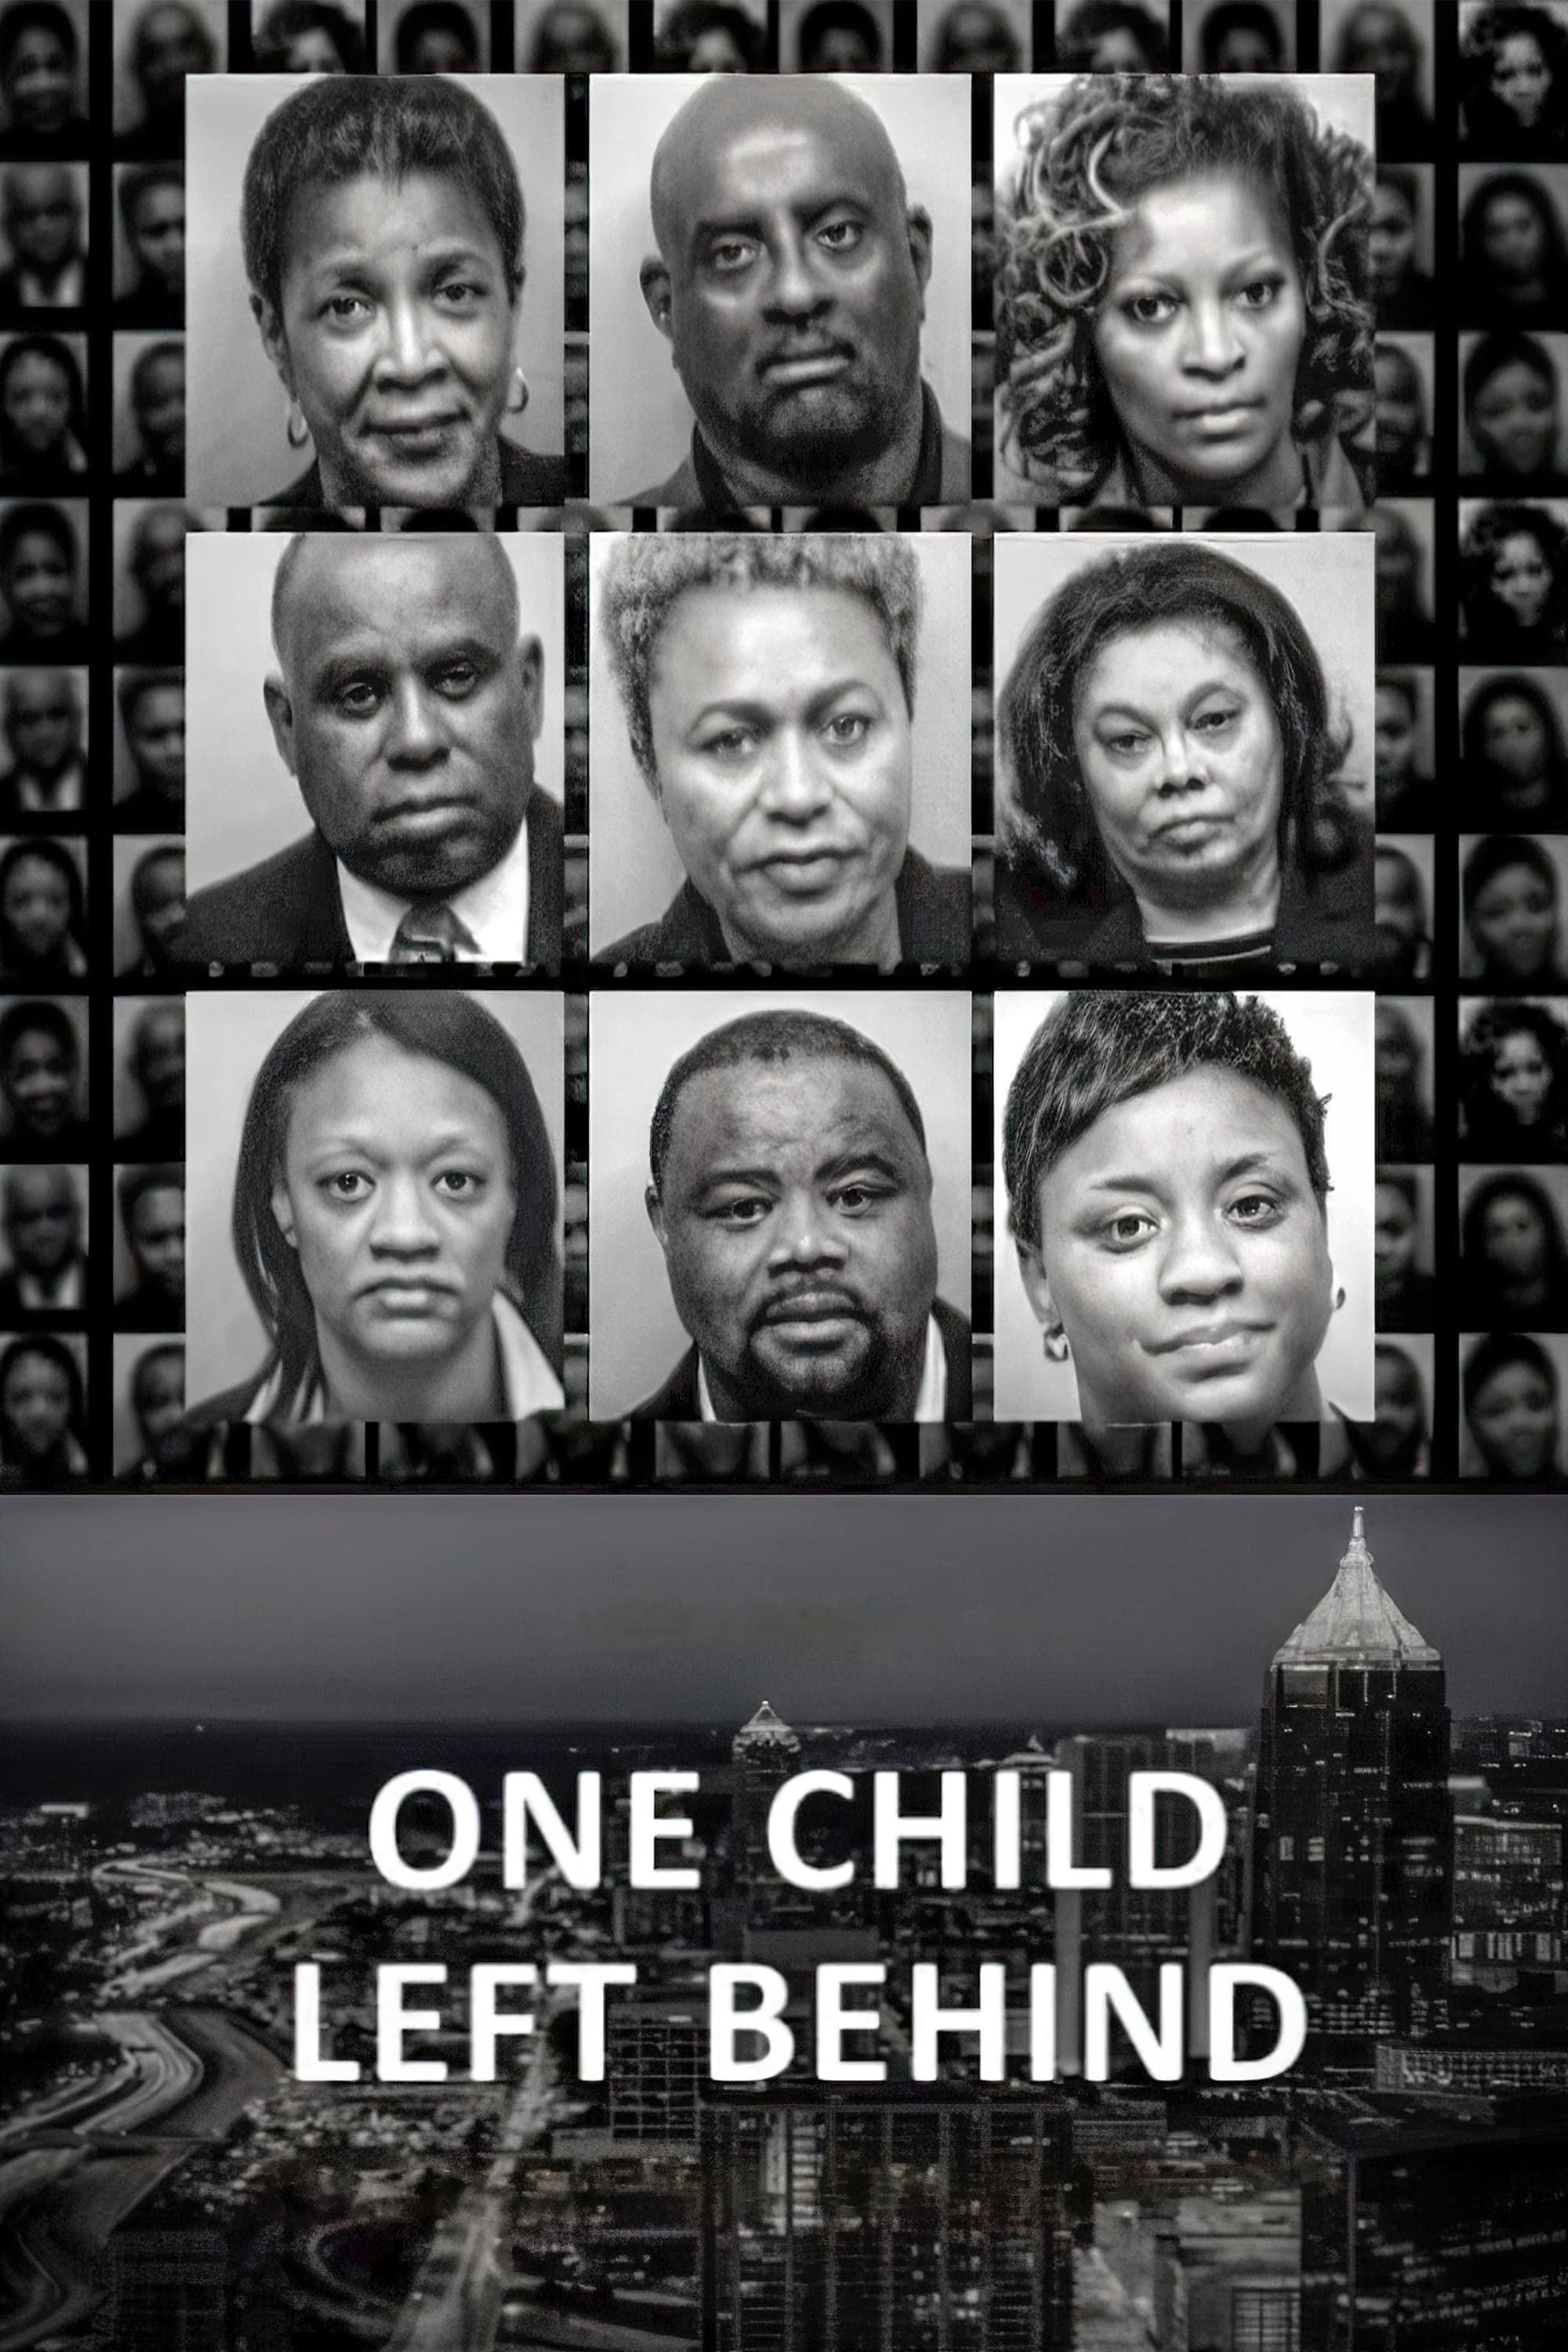 One Child Left Behind: The Untold Atlanta Cheating Scandal